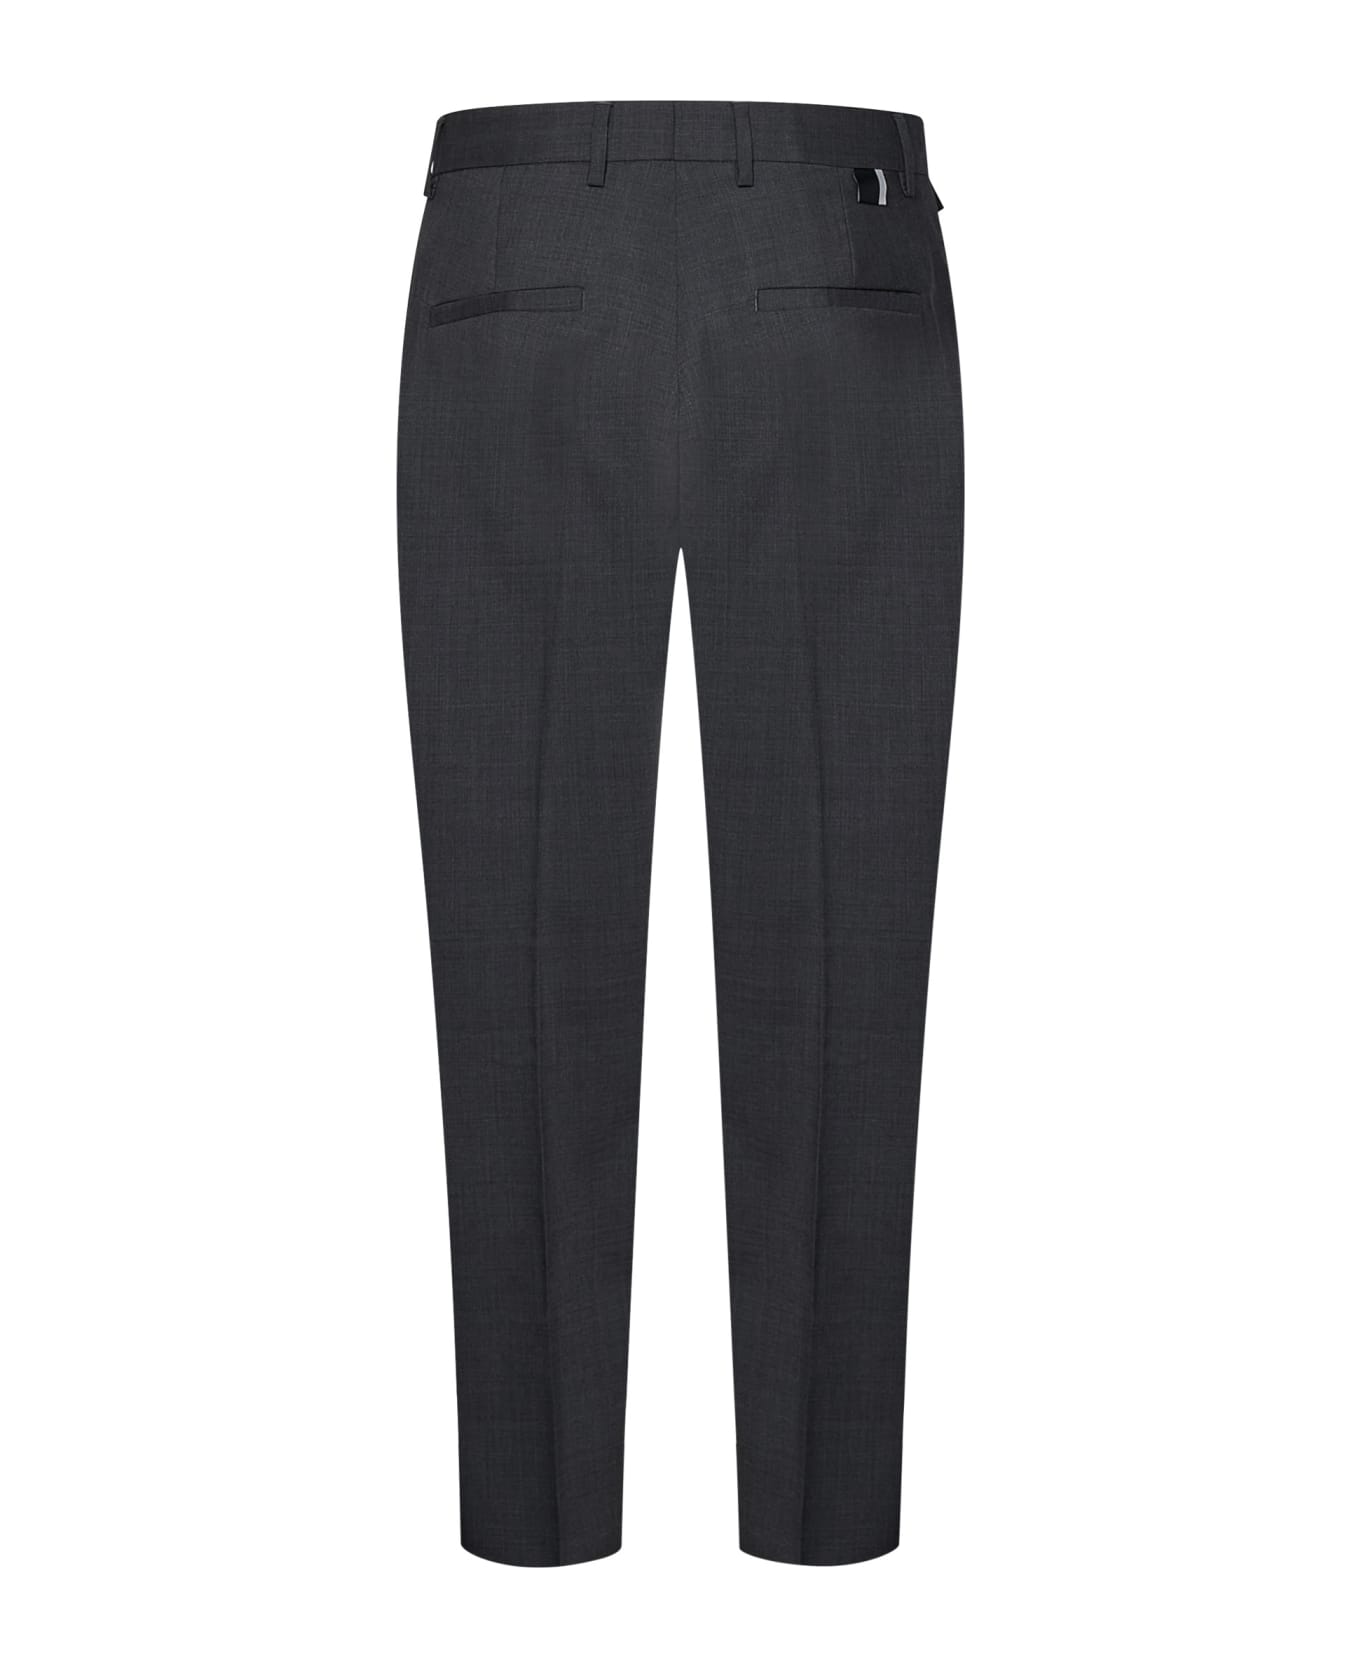 Low Brand Cooper Pocket Trousers - Grey